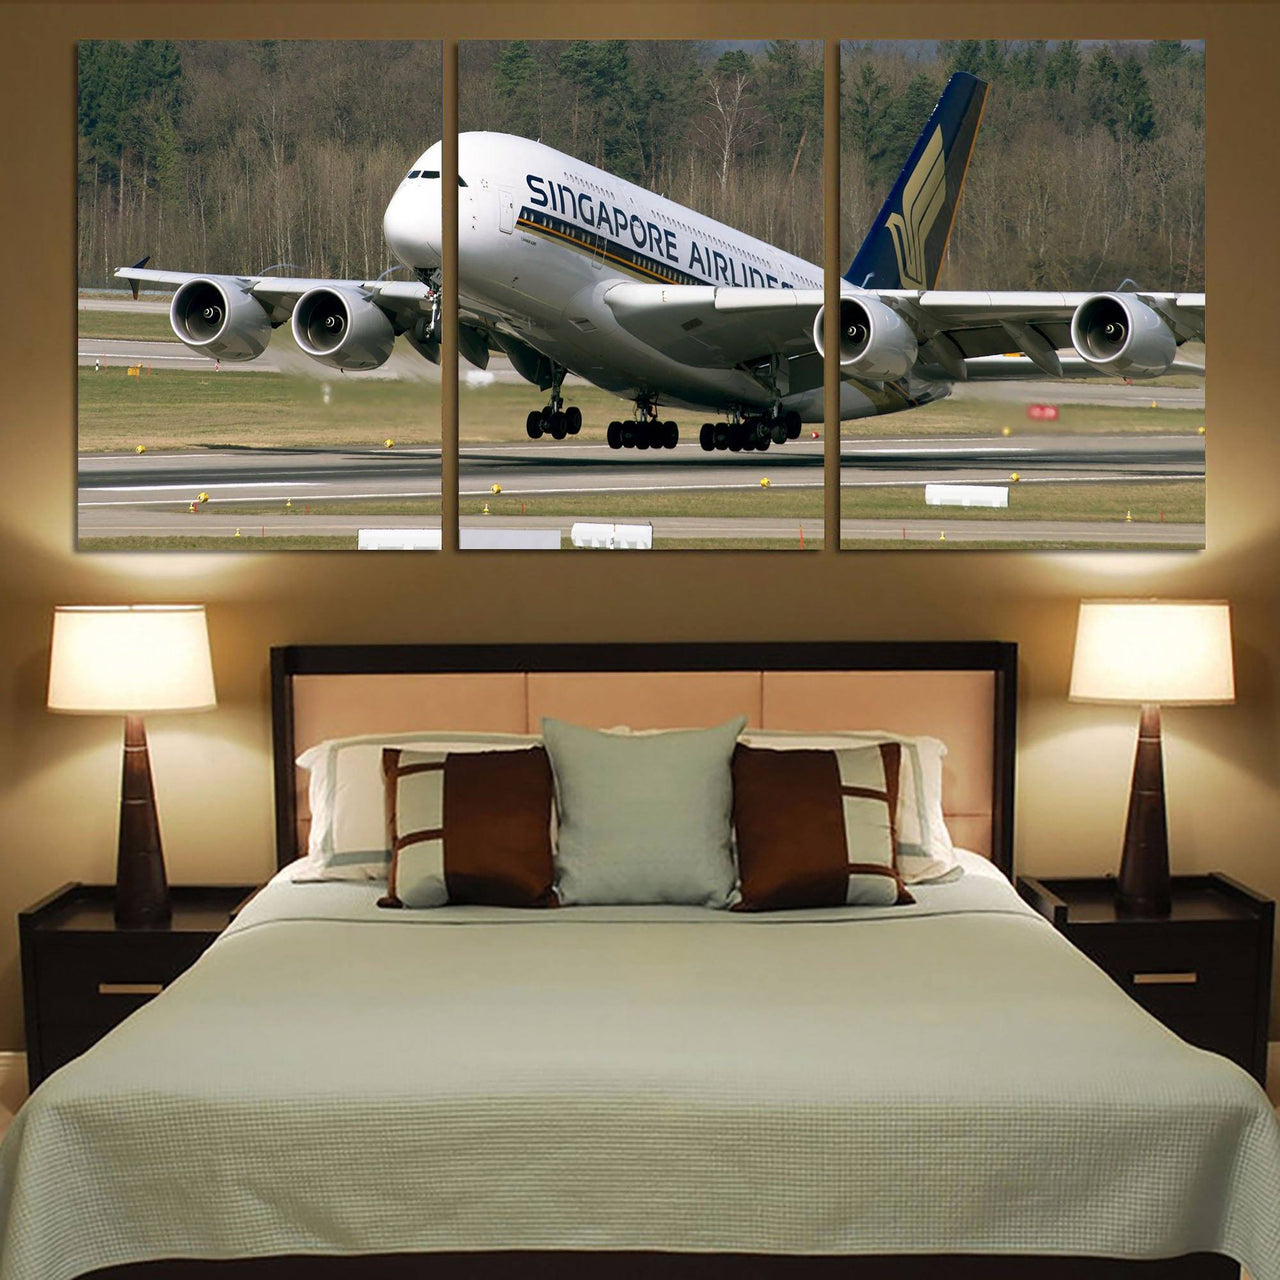 Departing Singapore Airlines A380 Printed Canvas Posters (3 Pieces) Aviation Shop 